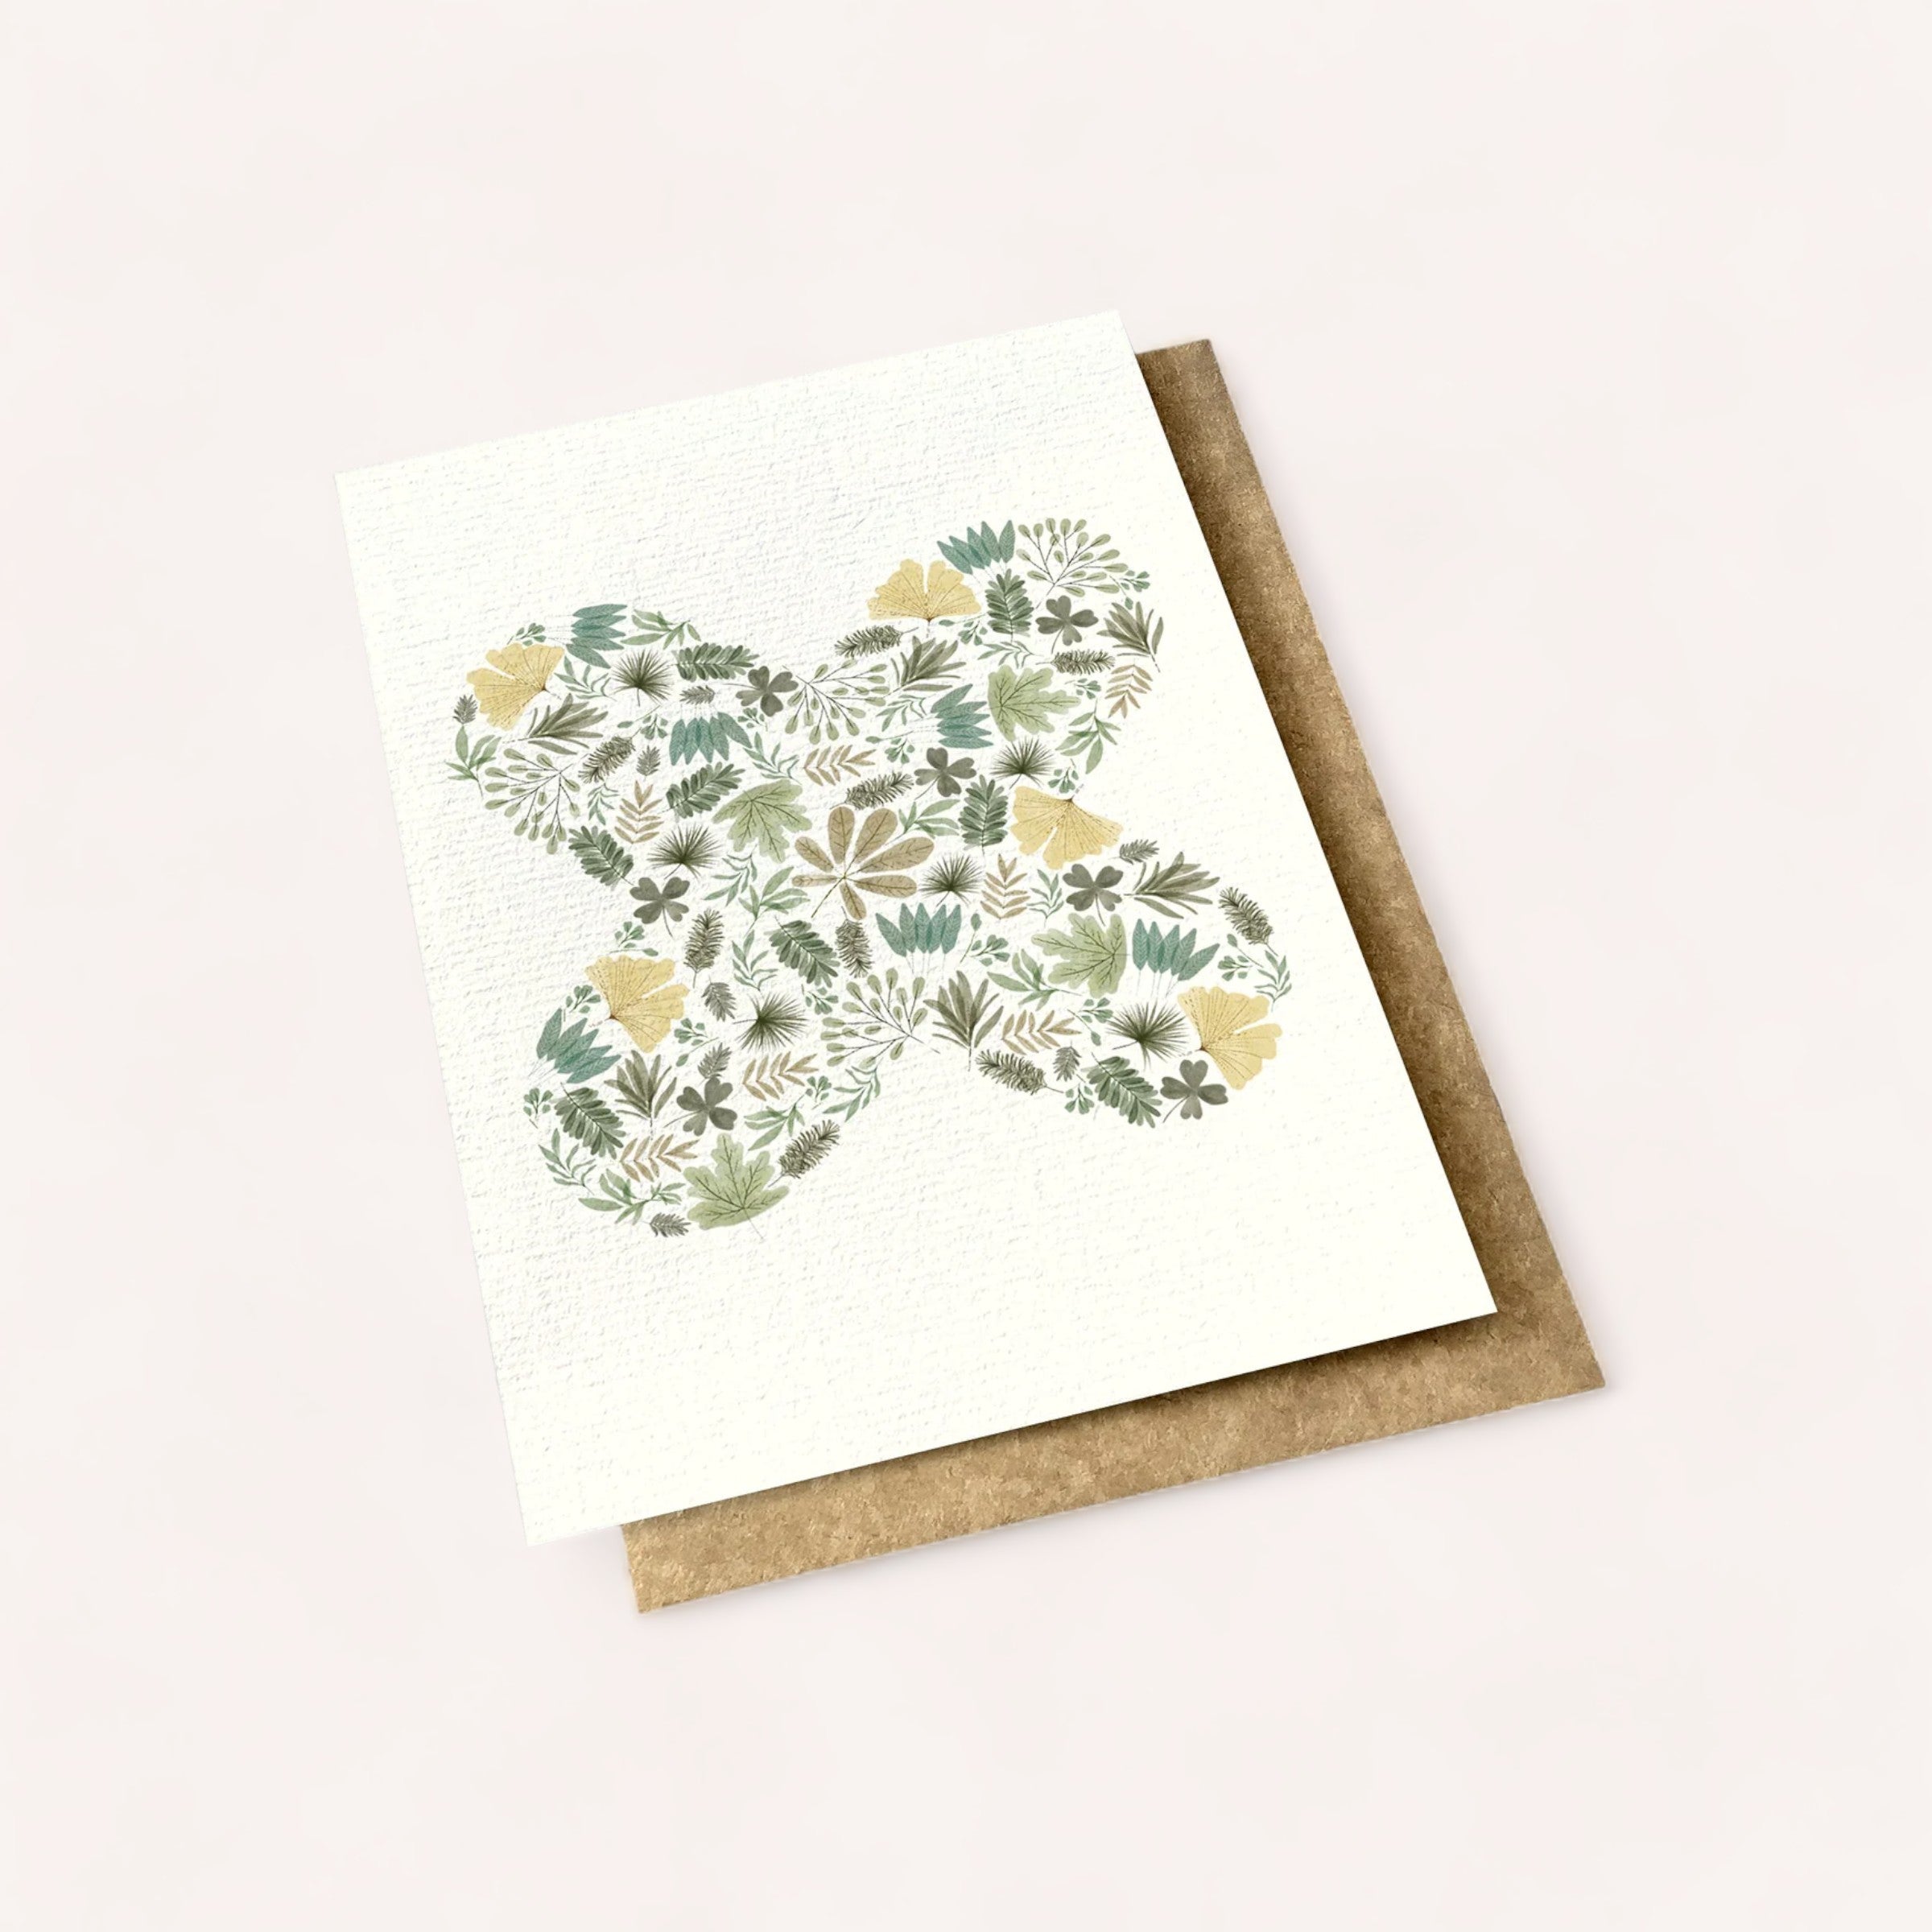 Floral Mandala Card with butterfly silhouette on a textured paper, accompanied by a kraft envelope on a plain background. Product of New Zealand. Made by Ink Bomb.